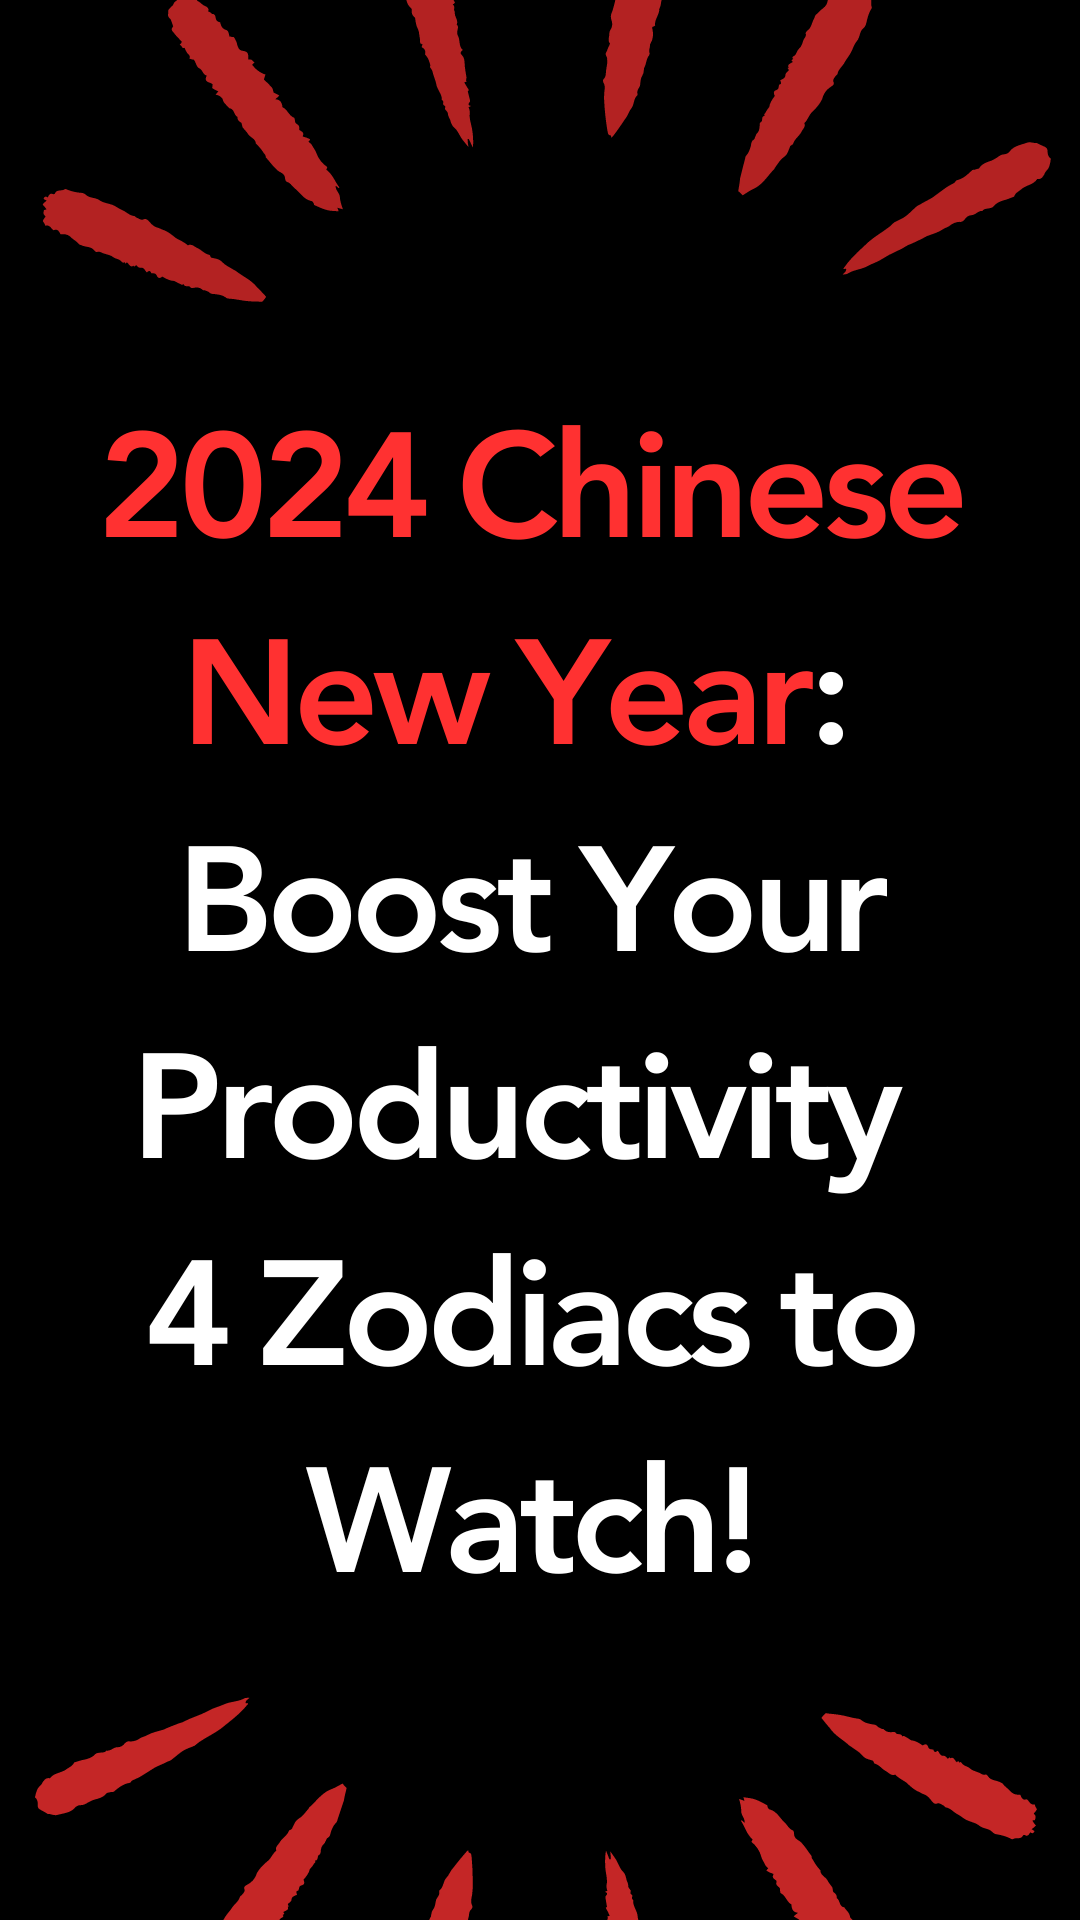 2024 Chinese New Year: Boost Your Productivity - 4 Zodiacs to Watch!